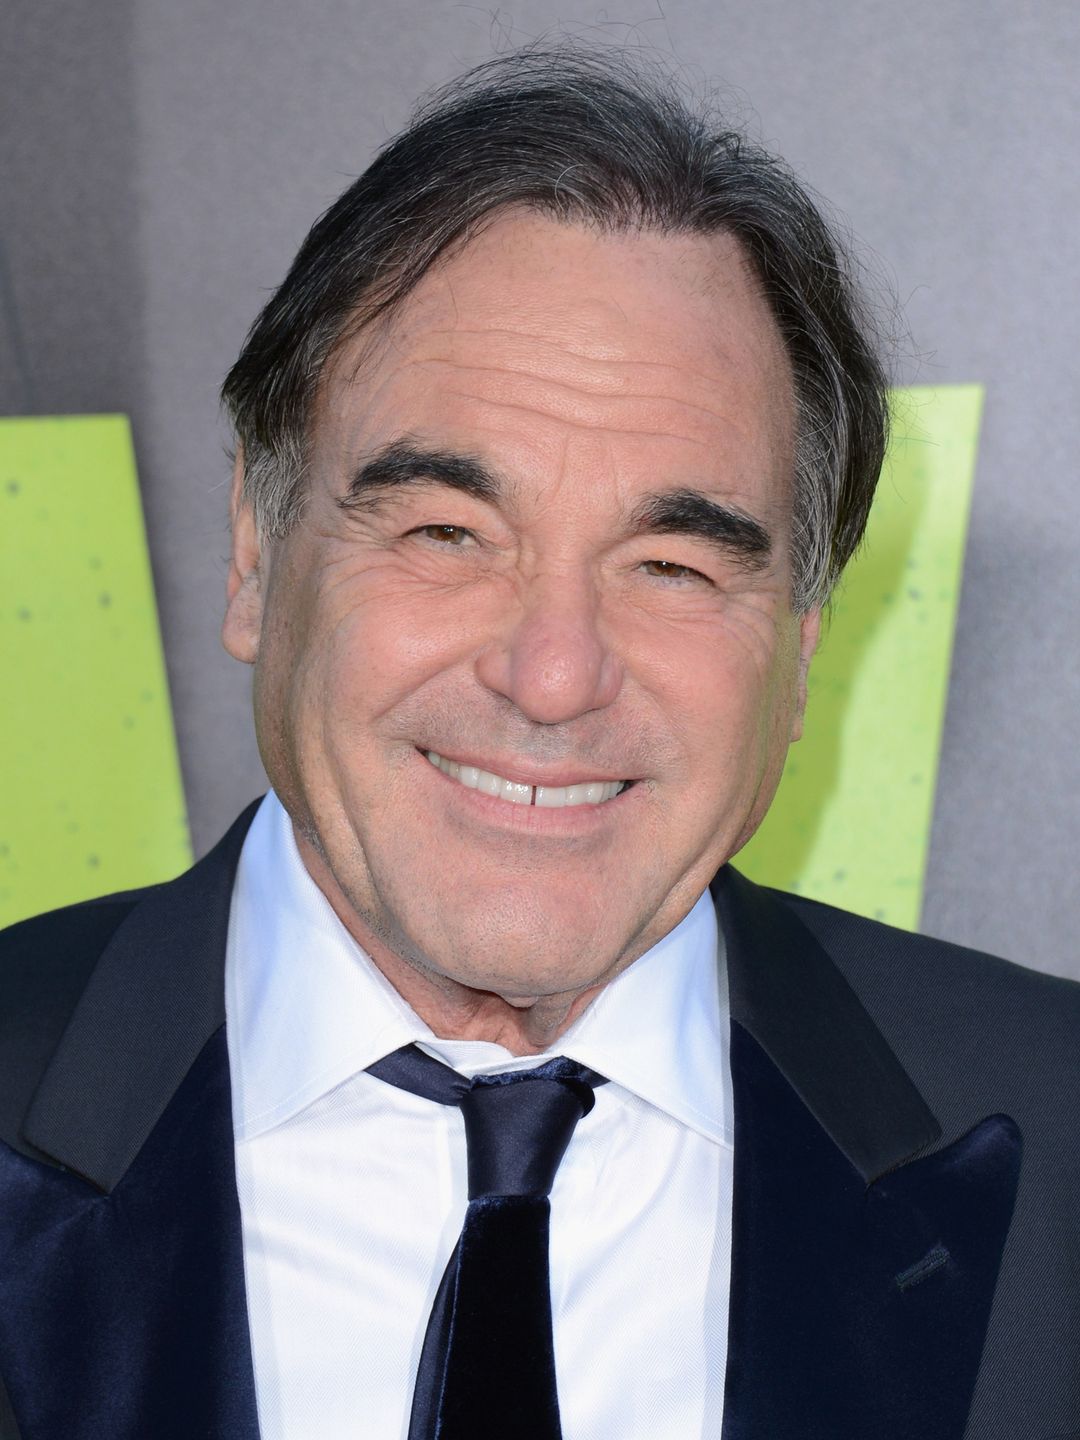 Oliver Stone interesting facts